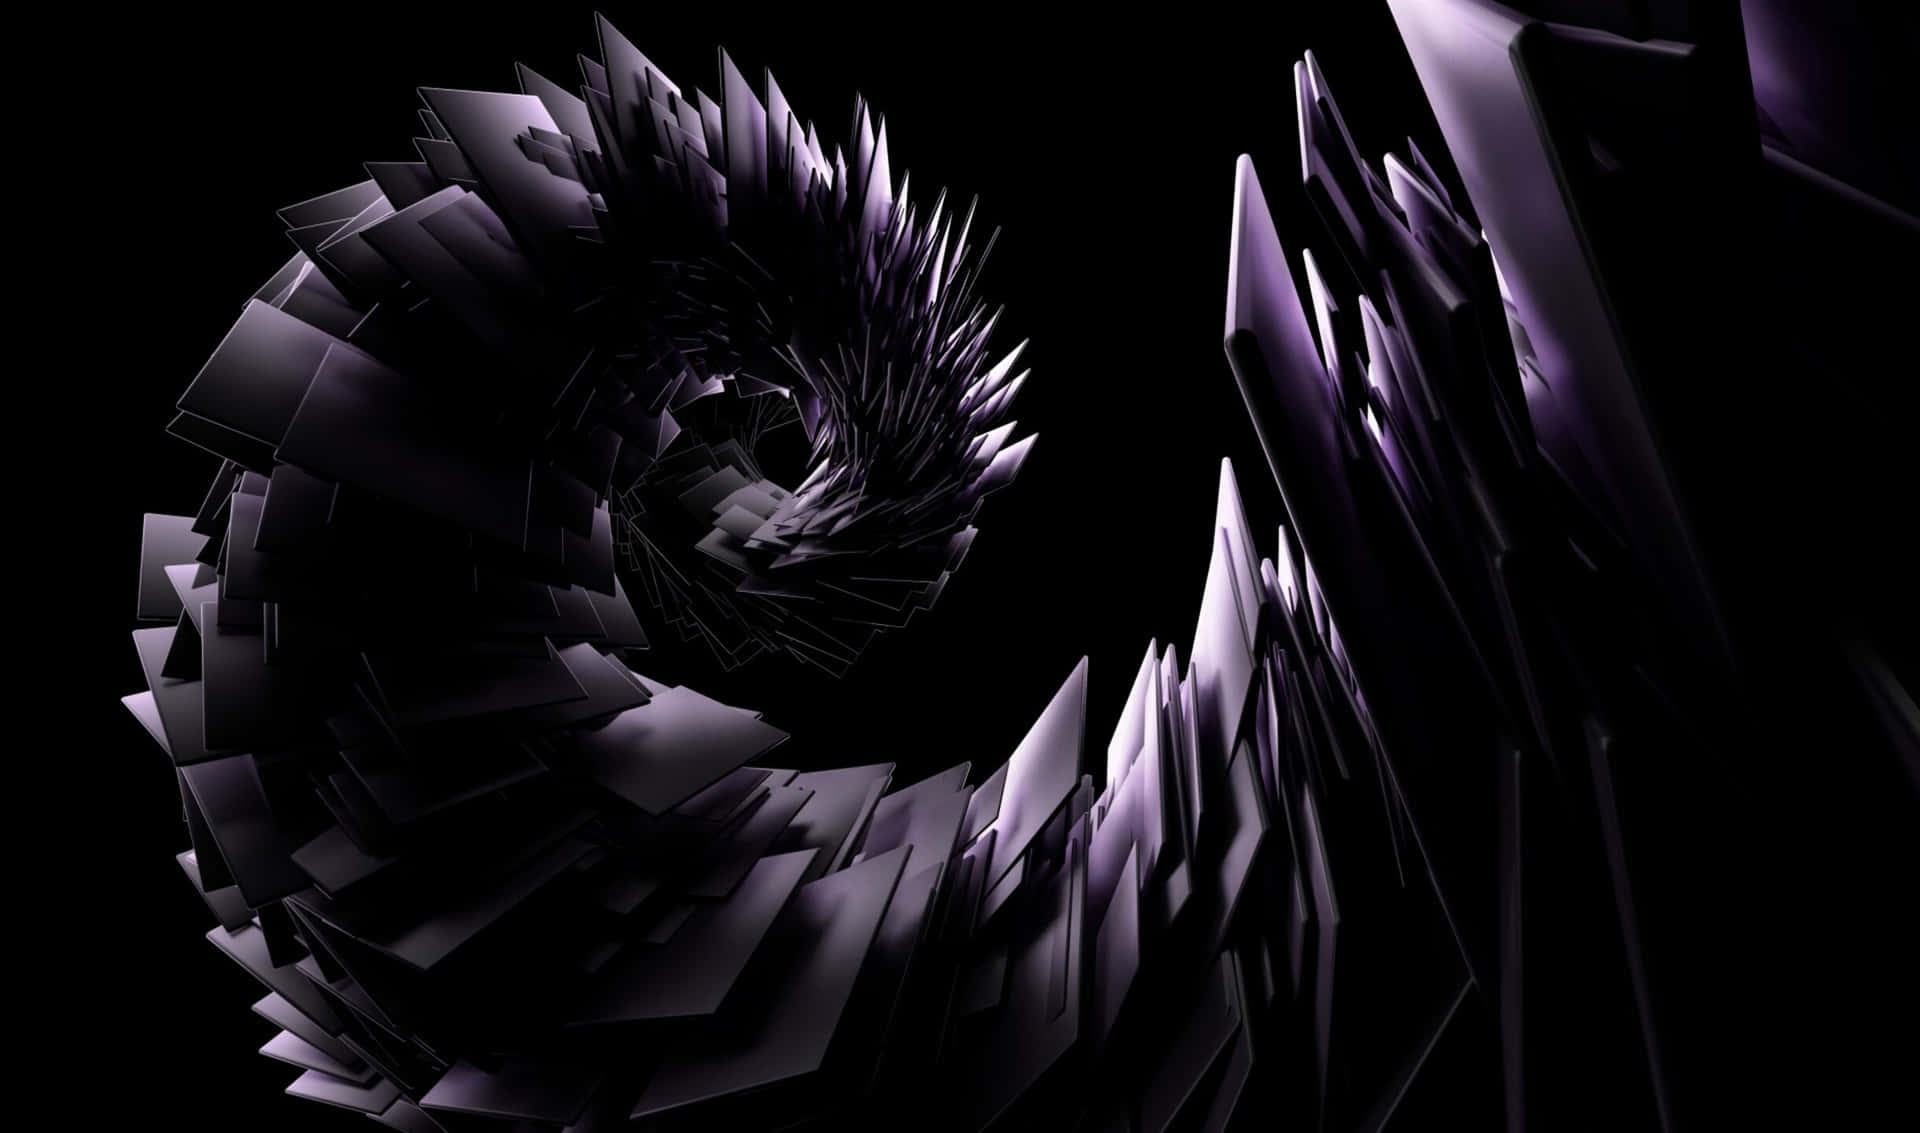 Download Black Swirl Shreds 2440x1440 Amoled Background | Wallpapers.com